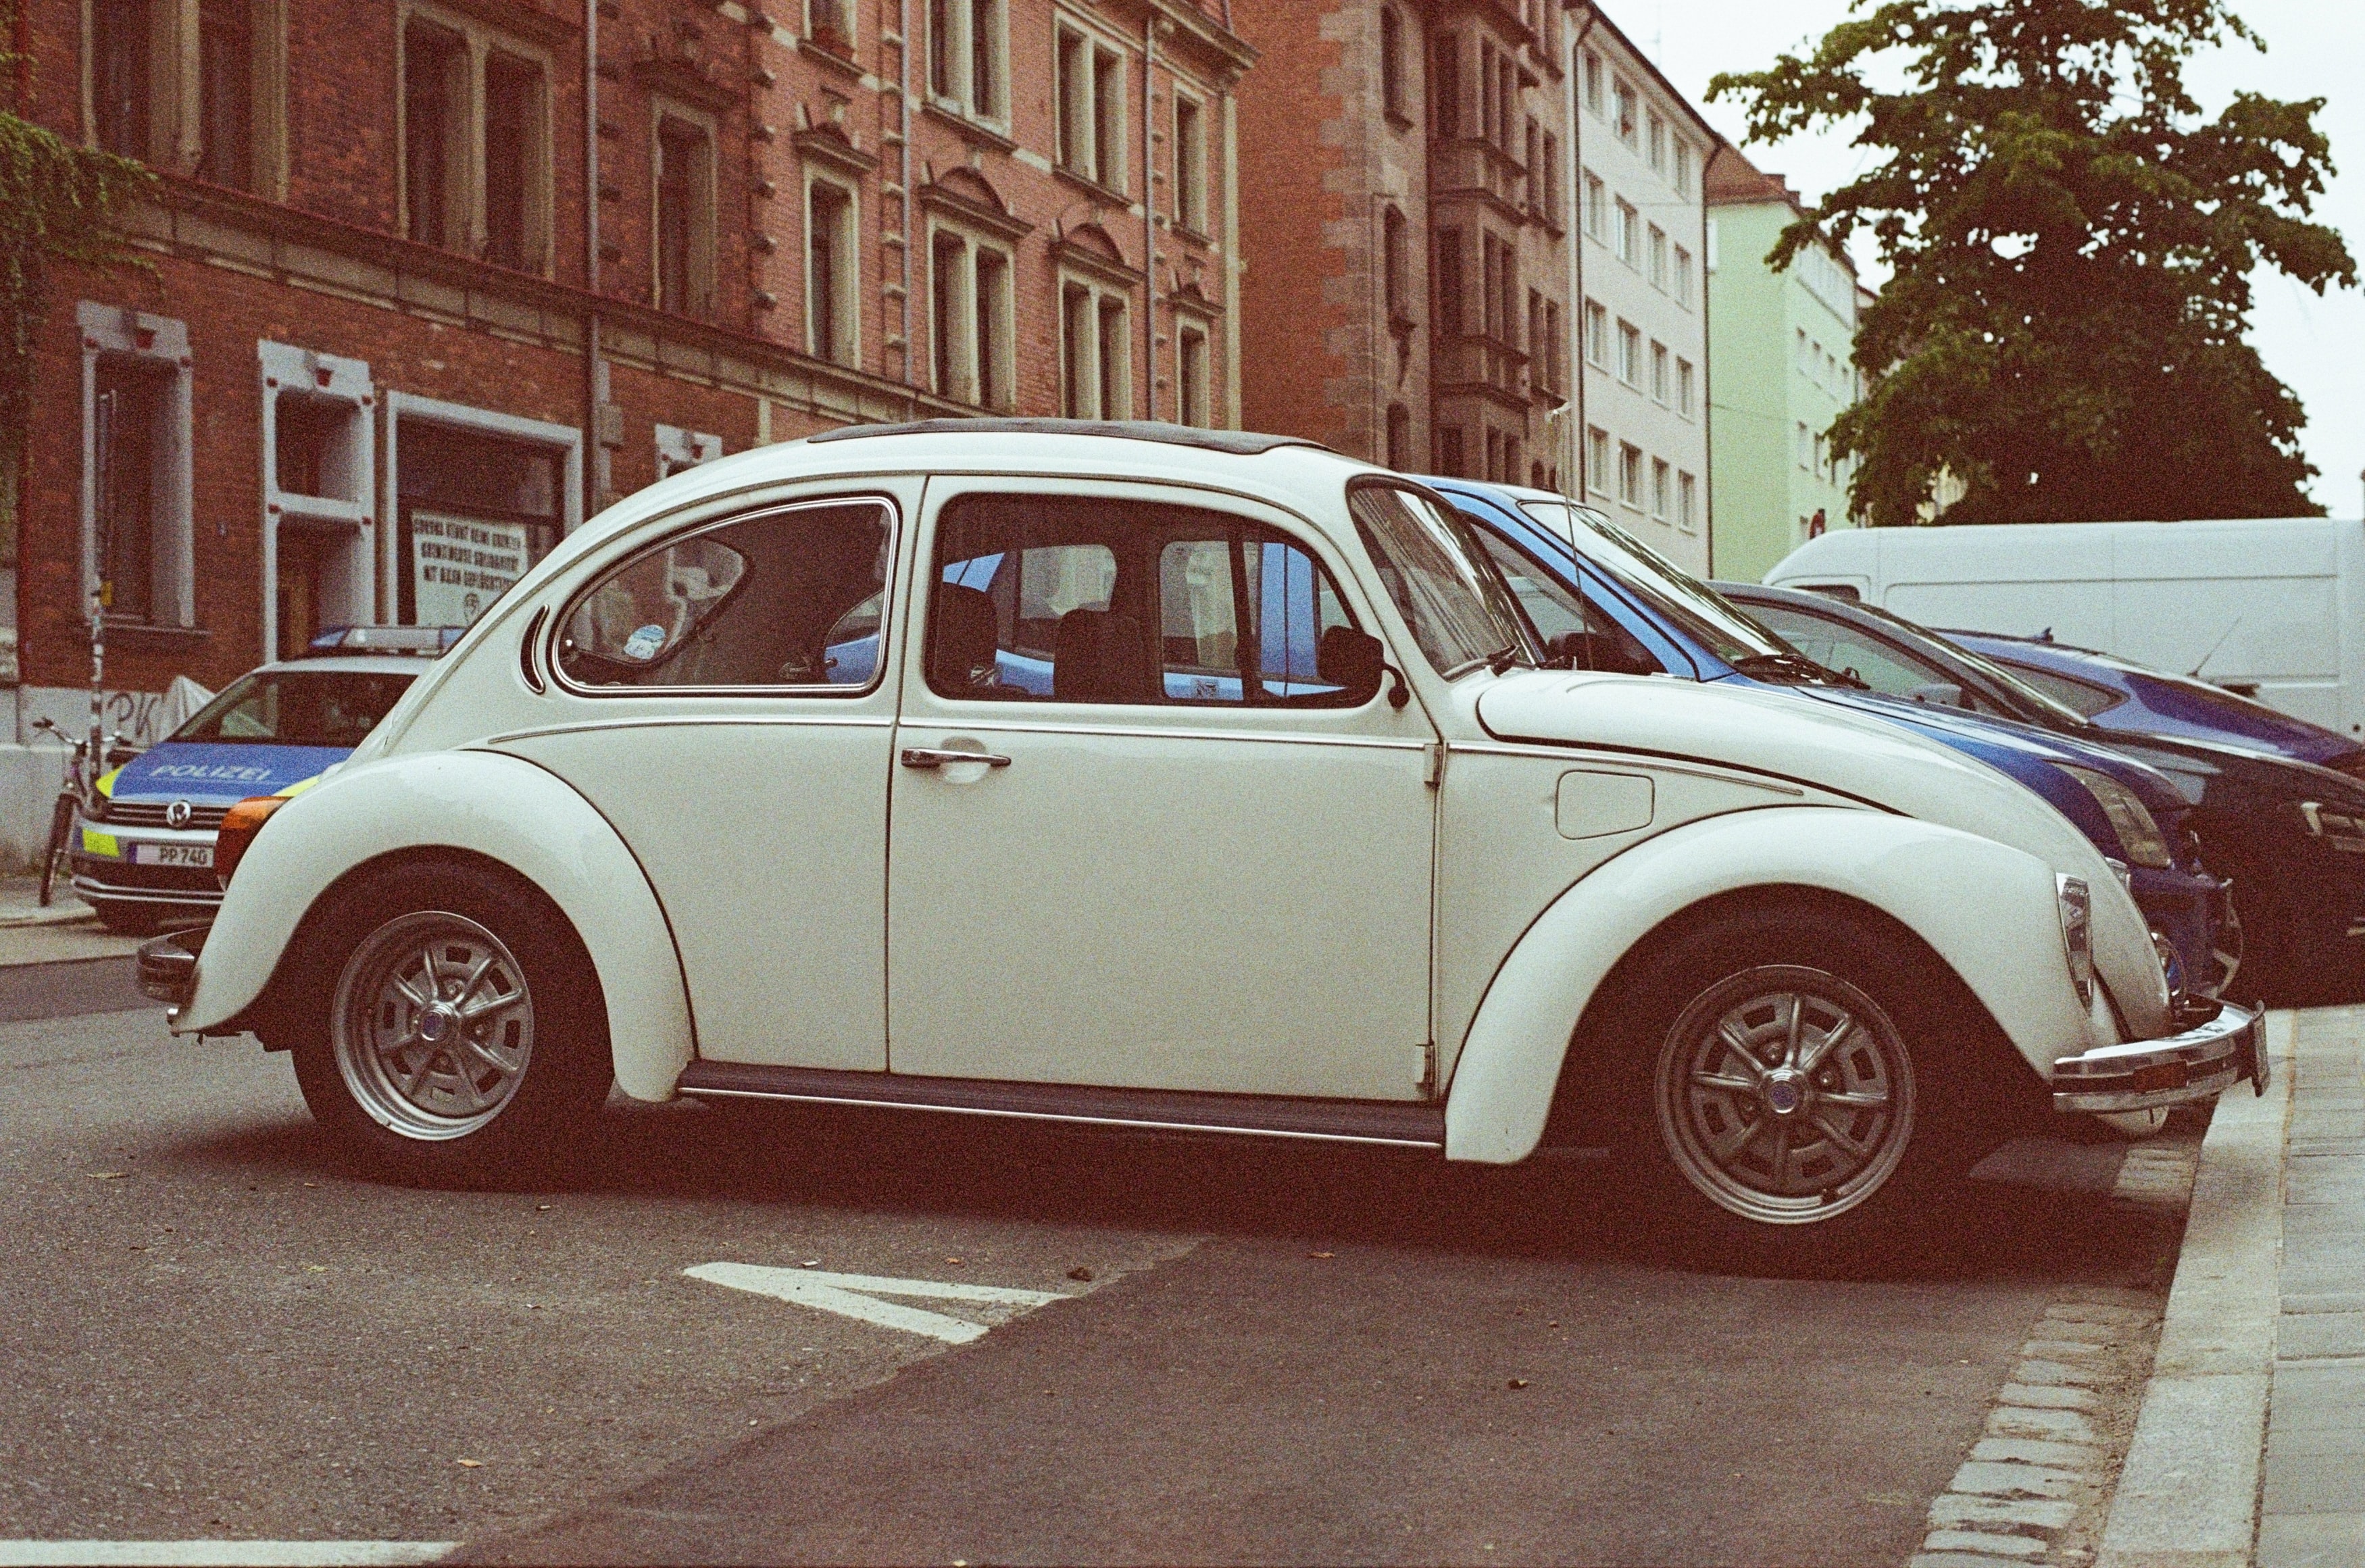 3500x2321px image of a white beetle car, Size 2.4mb